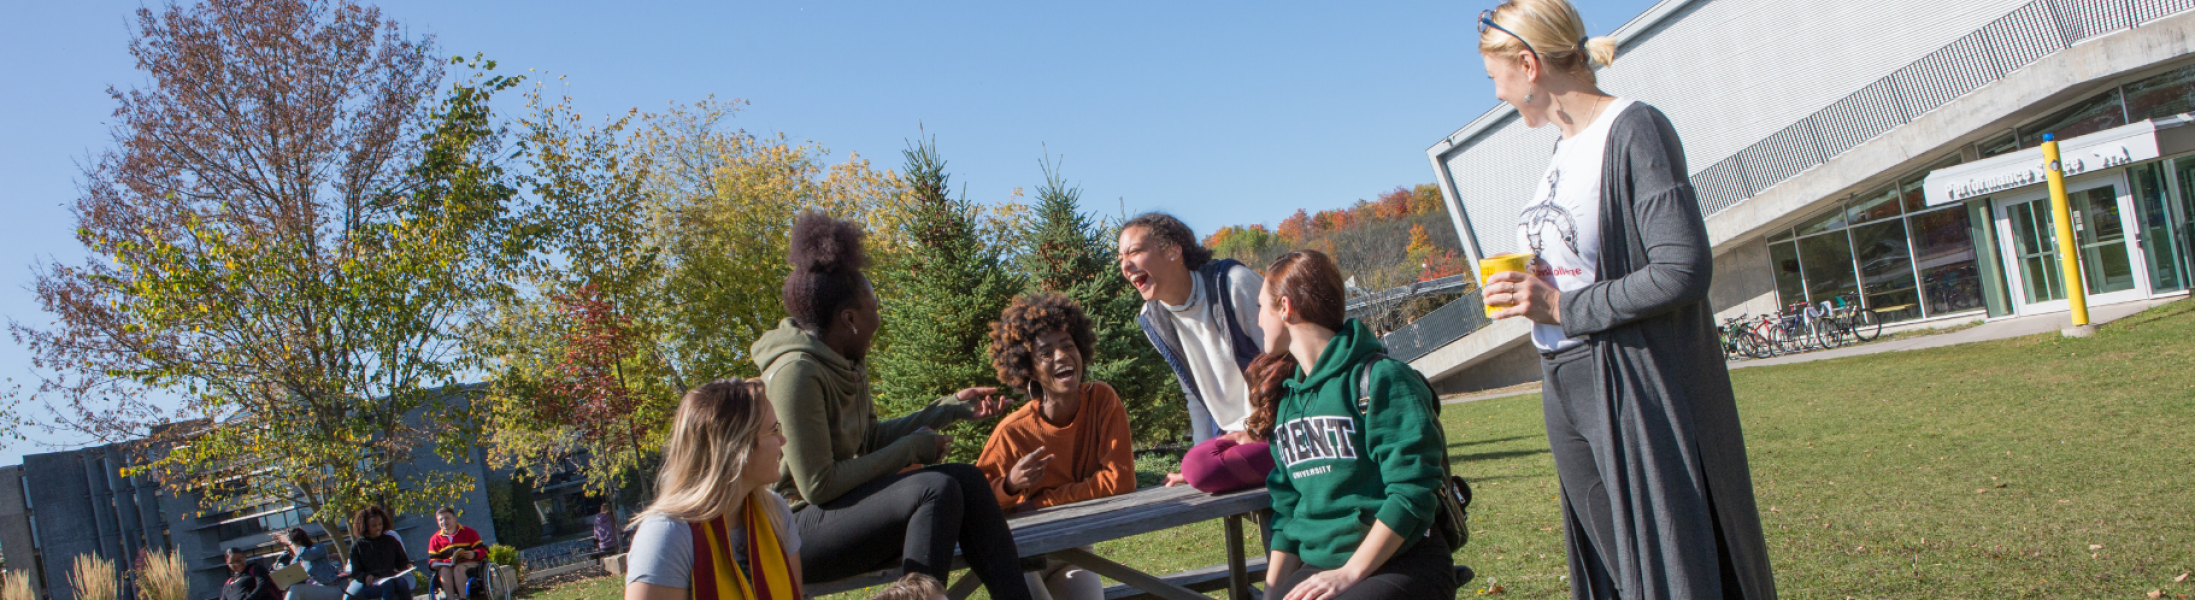 Group of students on picnic table laughing and chatting